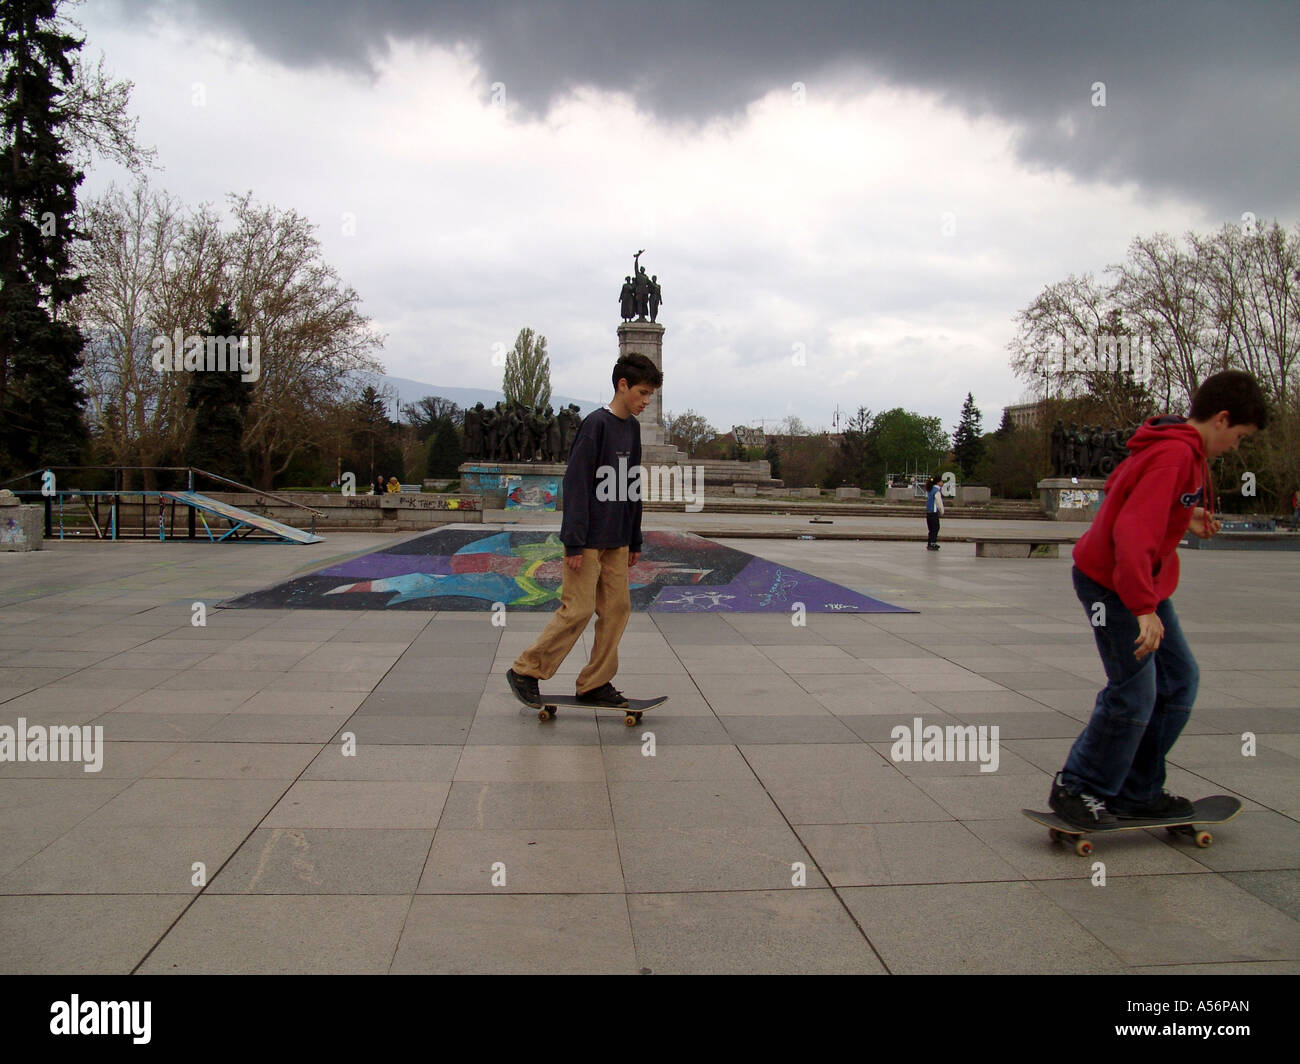 Painet ja0672 bulgaria skateboarders sofia photo 2004 europe country developing nation less economically developed culture Stock Photo